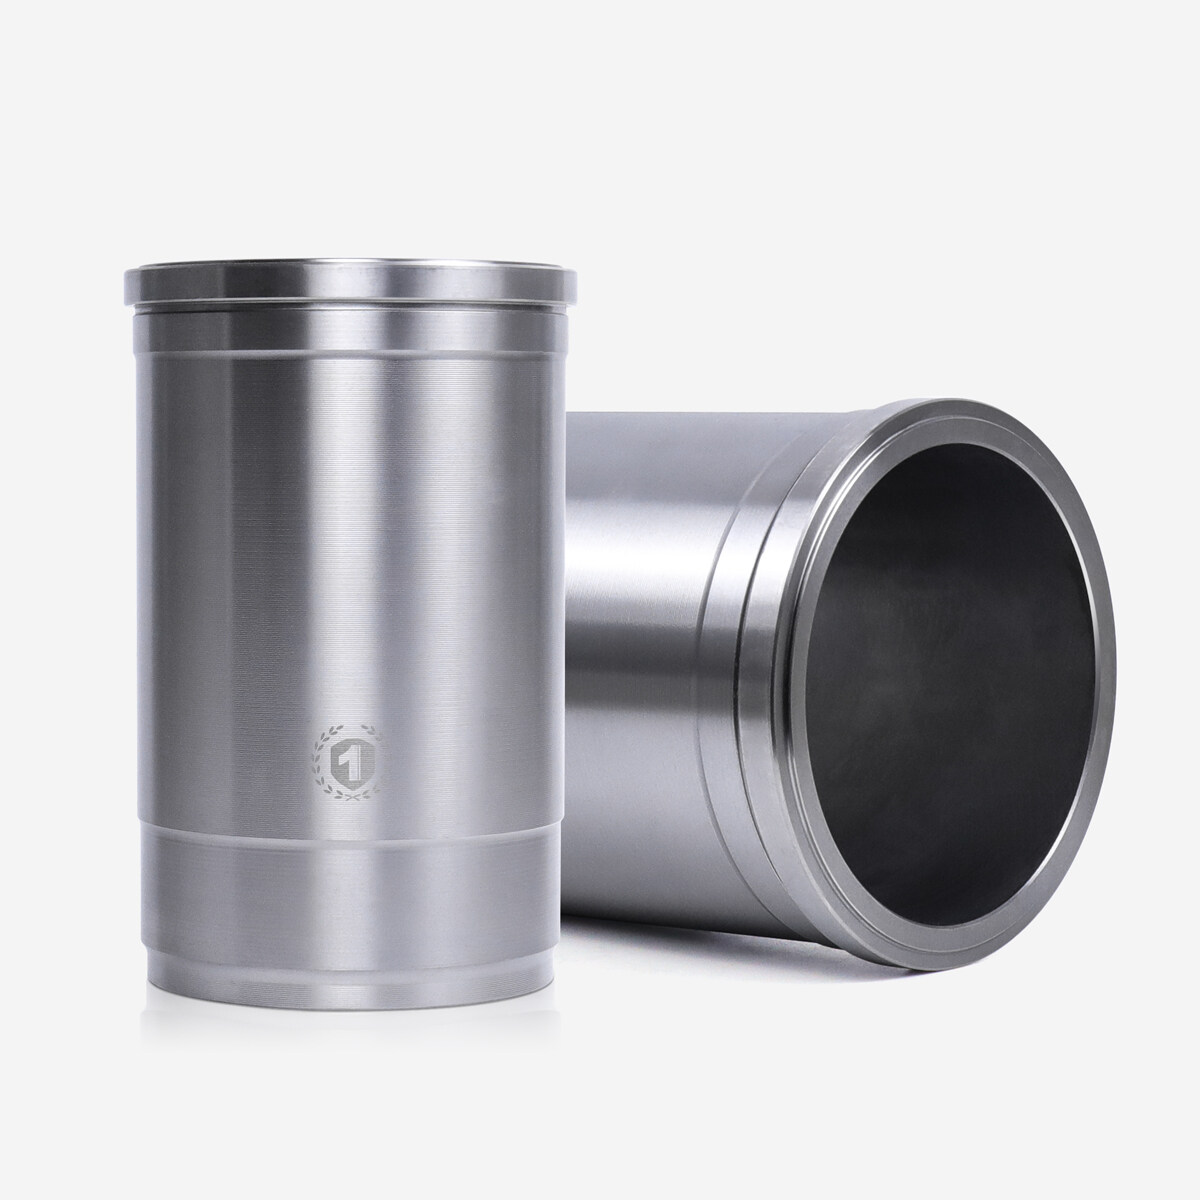 Cylinder liner material, structure, and quality classification